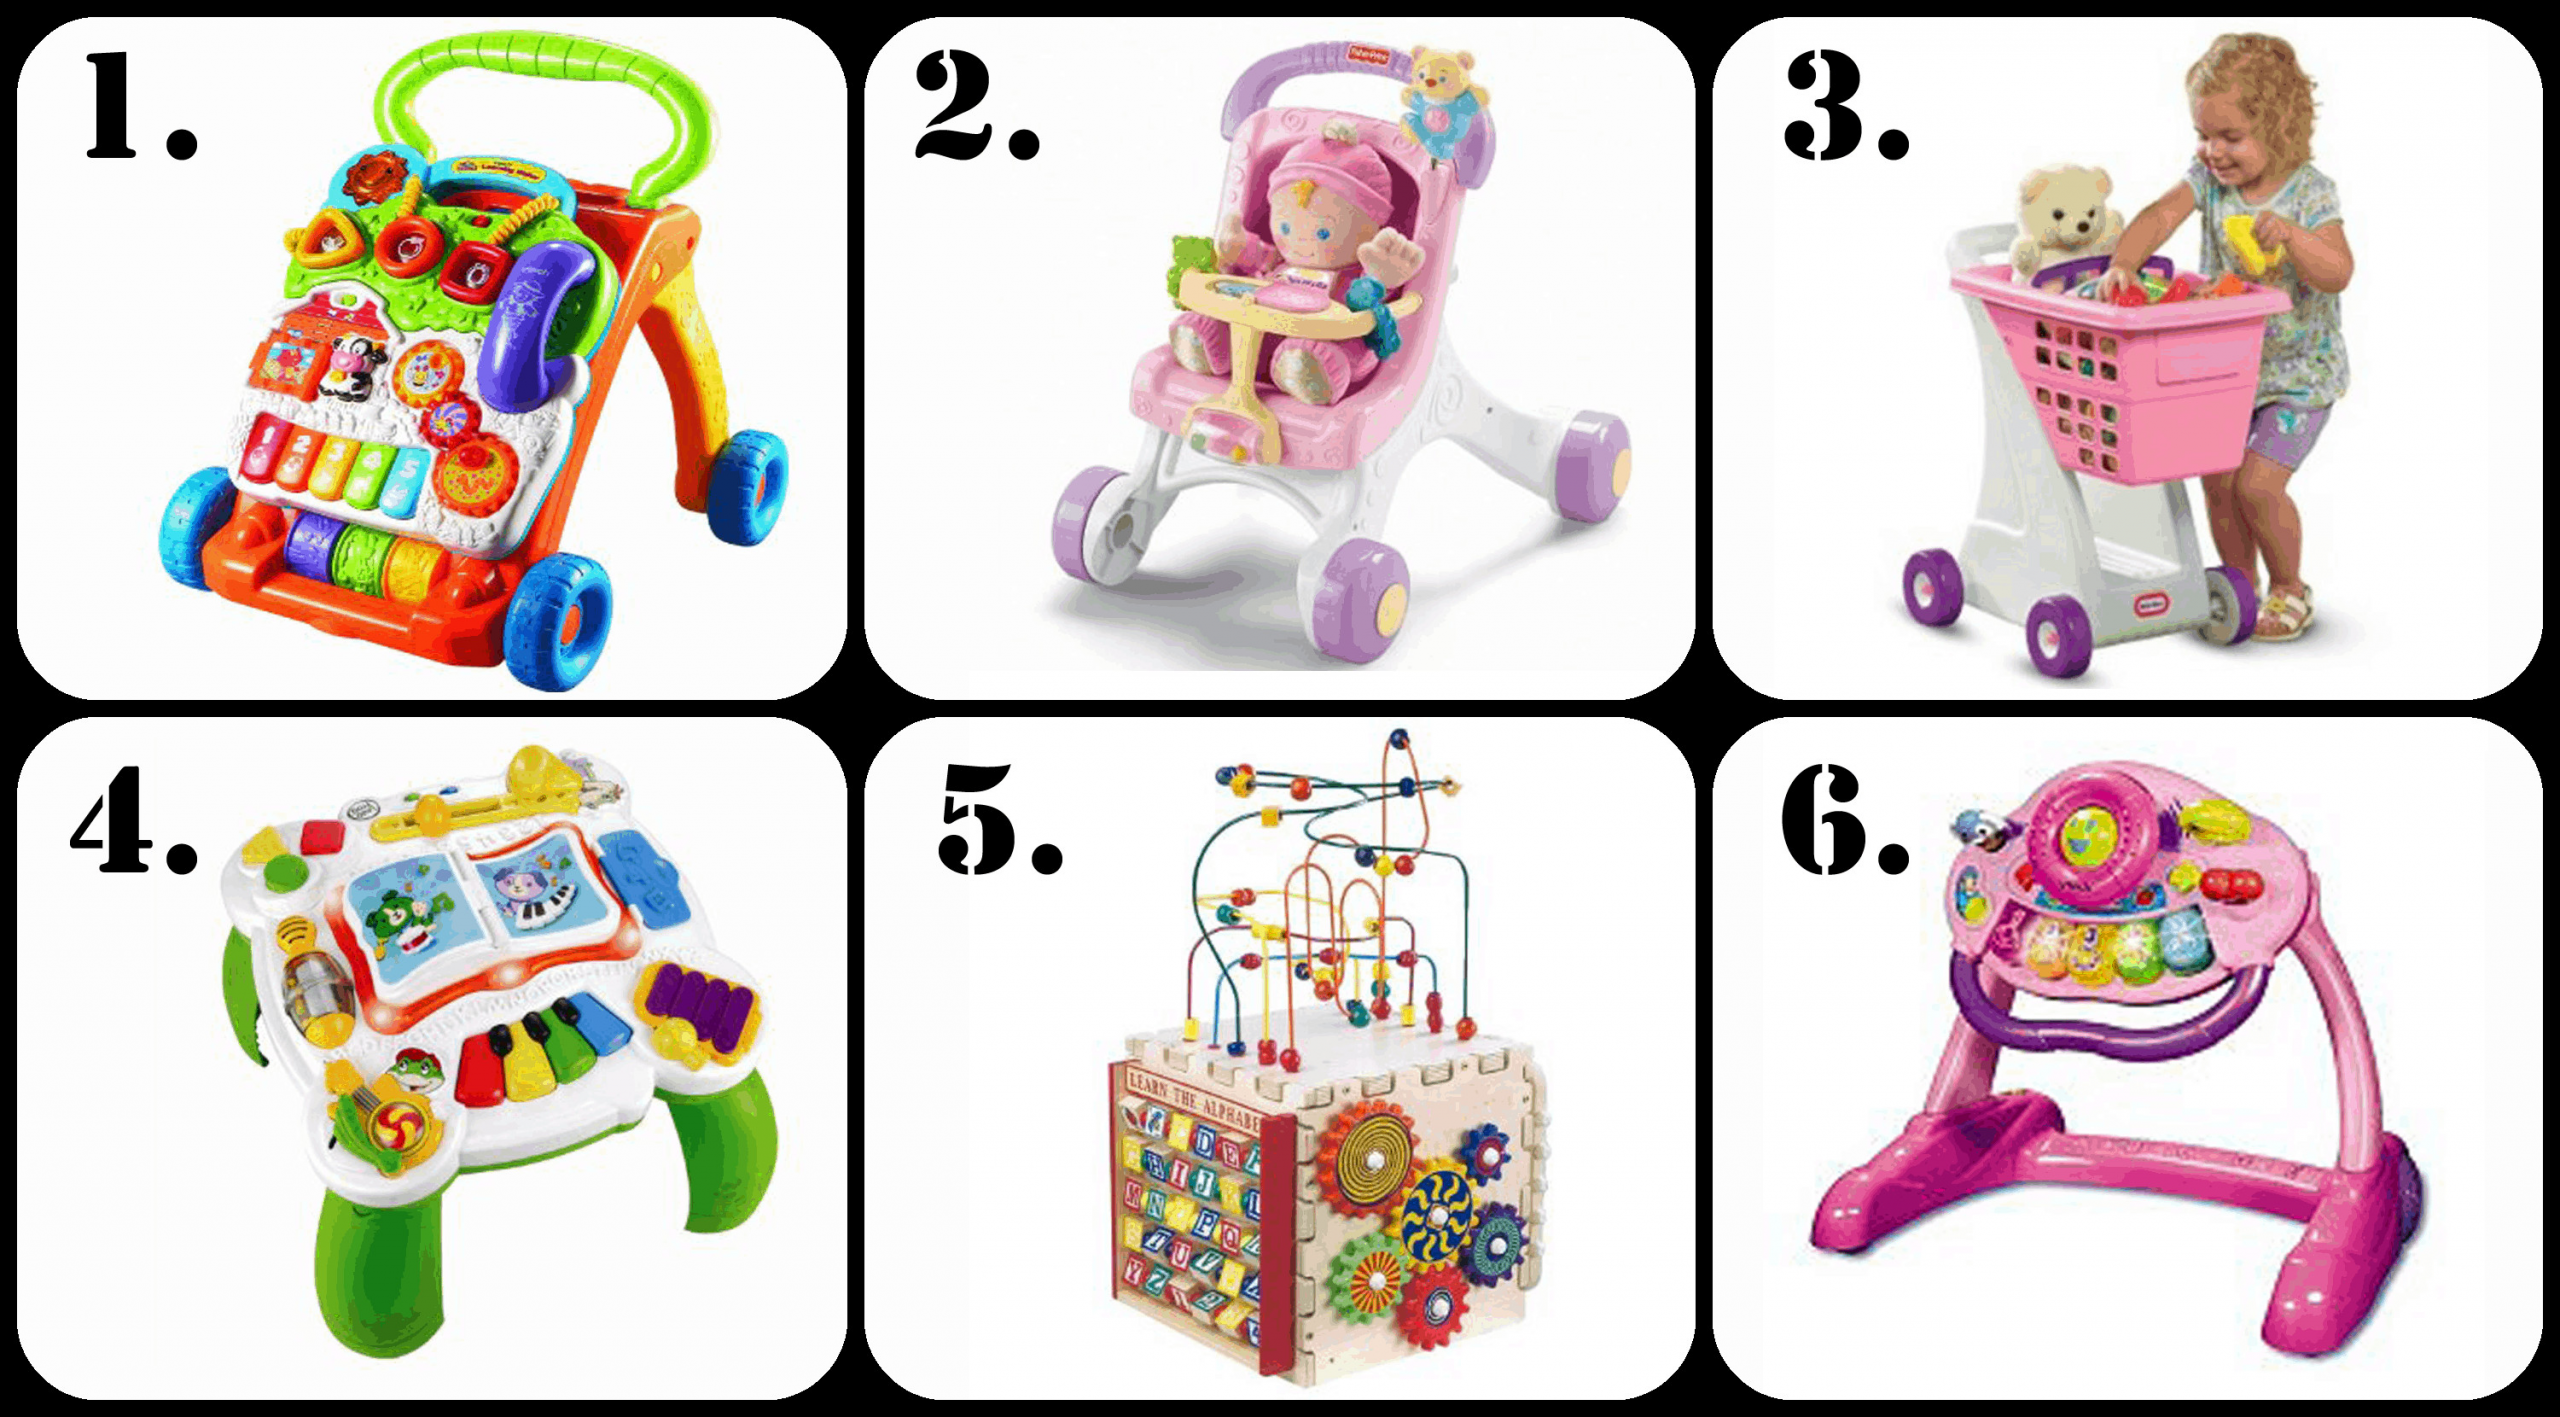 One Year Gift Ideas For Girlfriend
 The Ultimate List of Gift Ideas for a 1 Year Old Girl